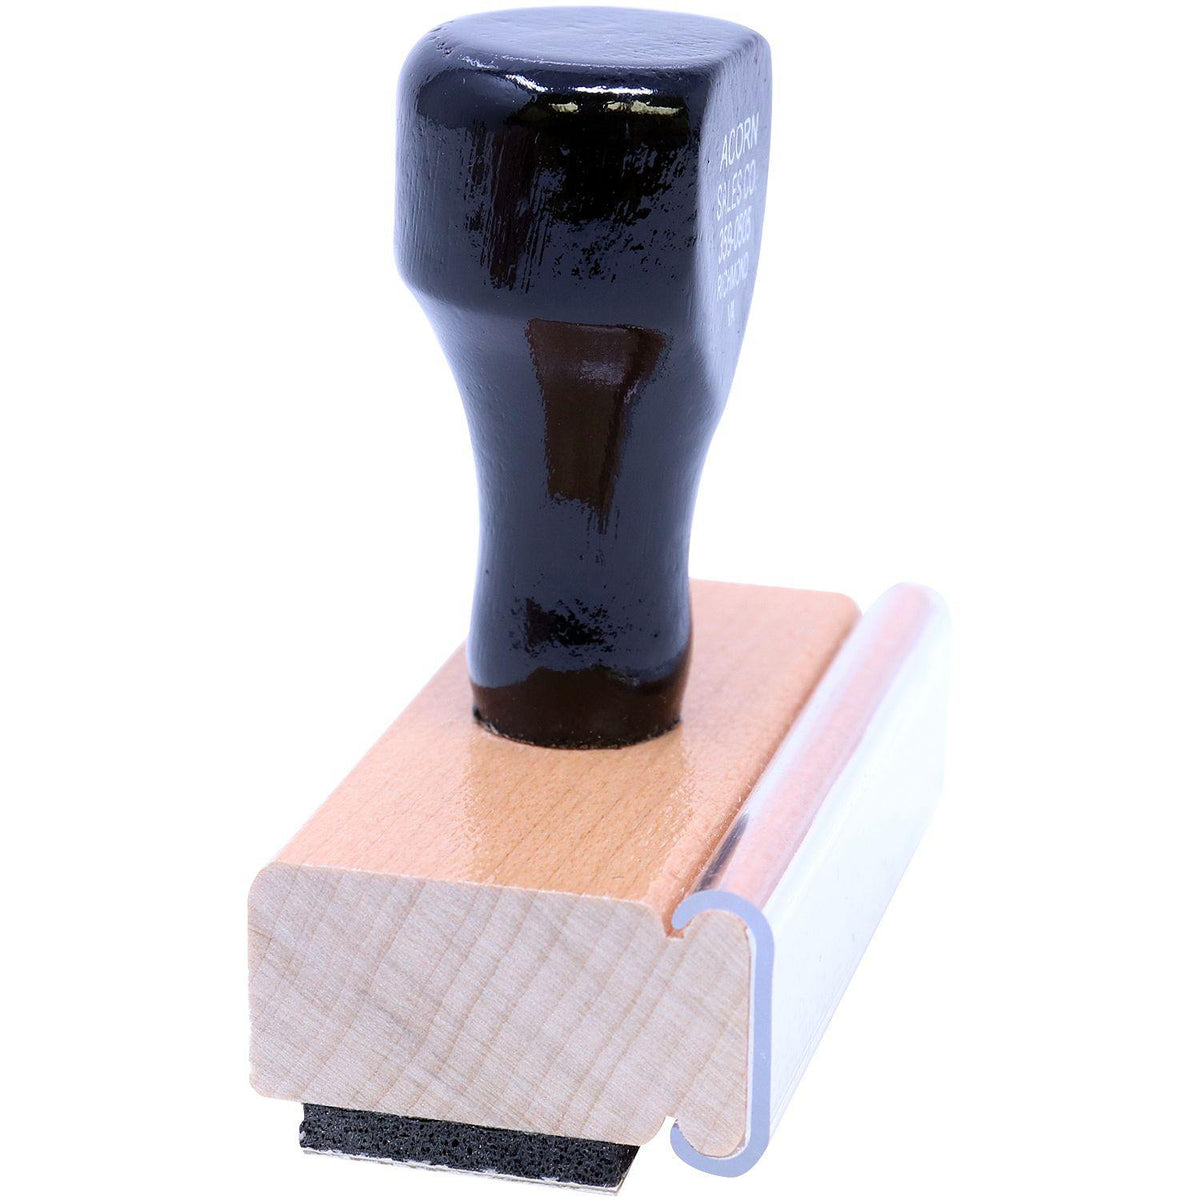 Side View of Large Cursive Draft Rubber Stamp at an Angle